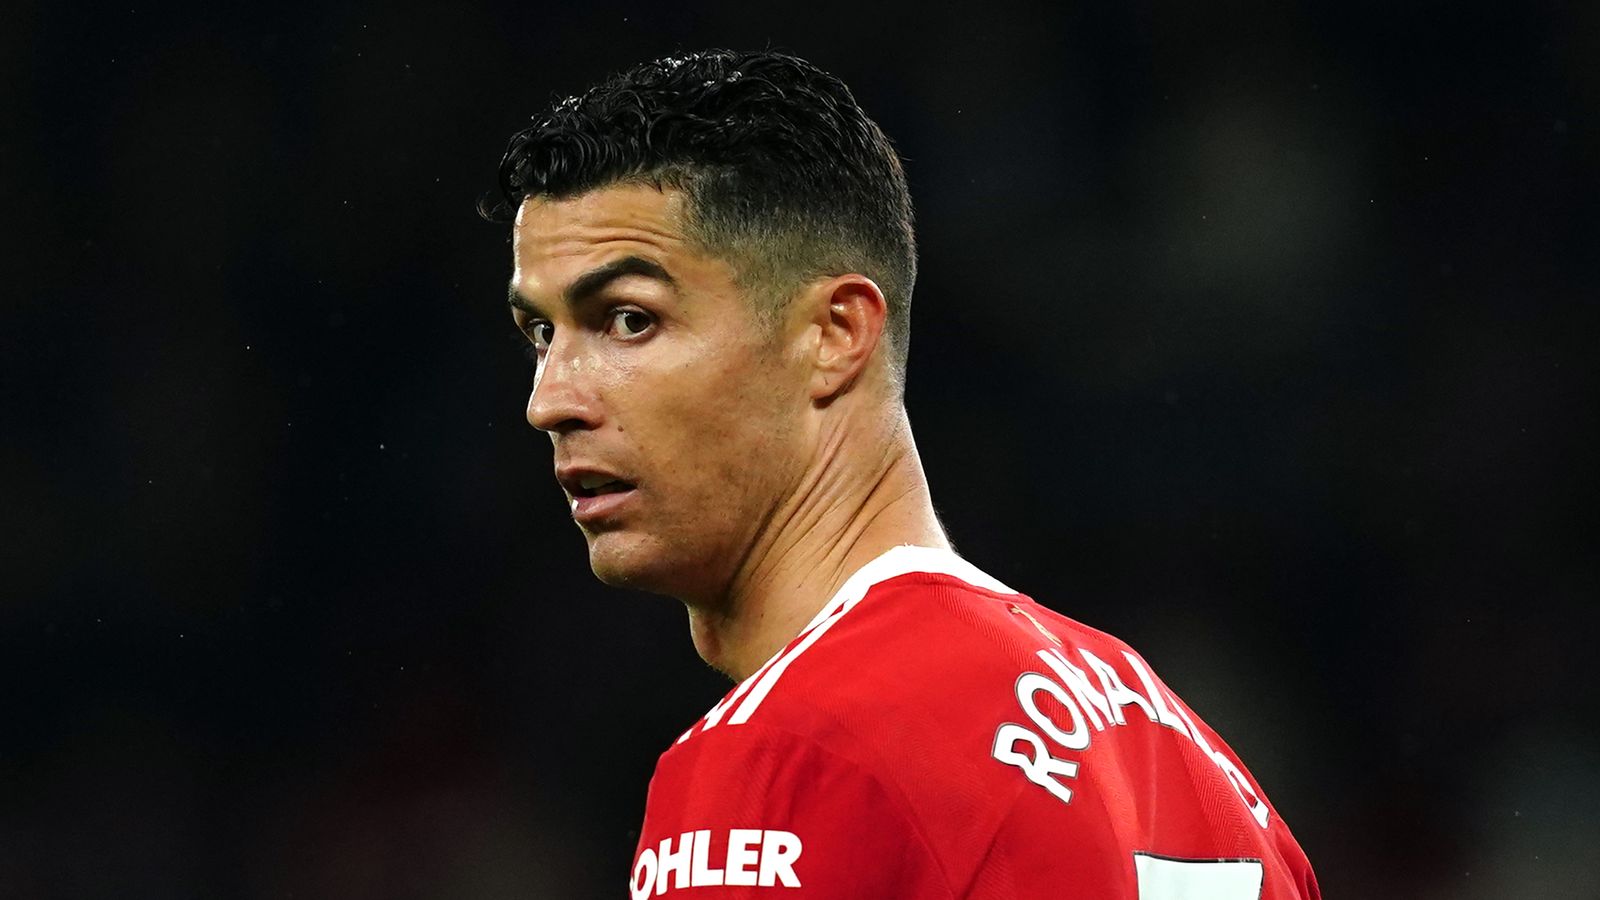 Cristiano Ronaldo situation is messy for everybody, says Gary Neville | Jamie Carragher: Man Utd better off without him